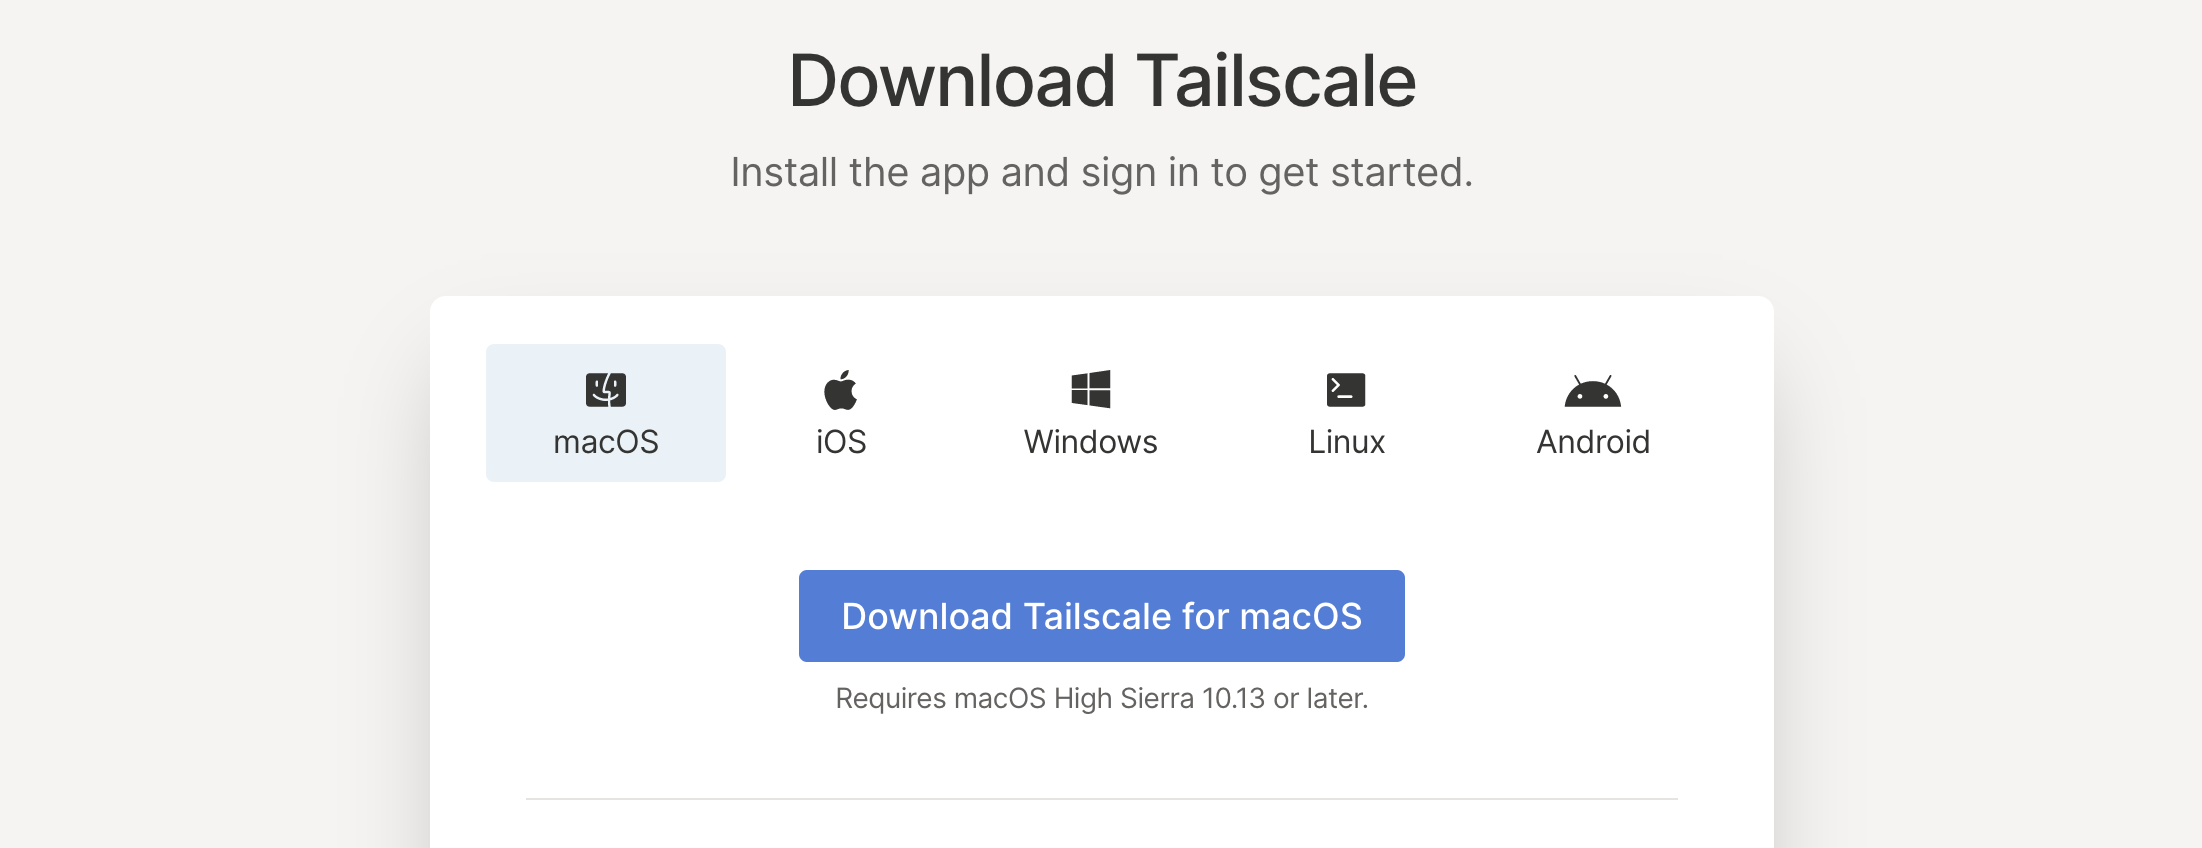 Download Tailscale app for macOS